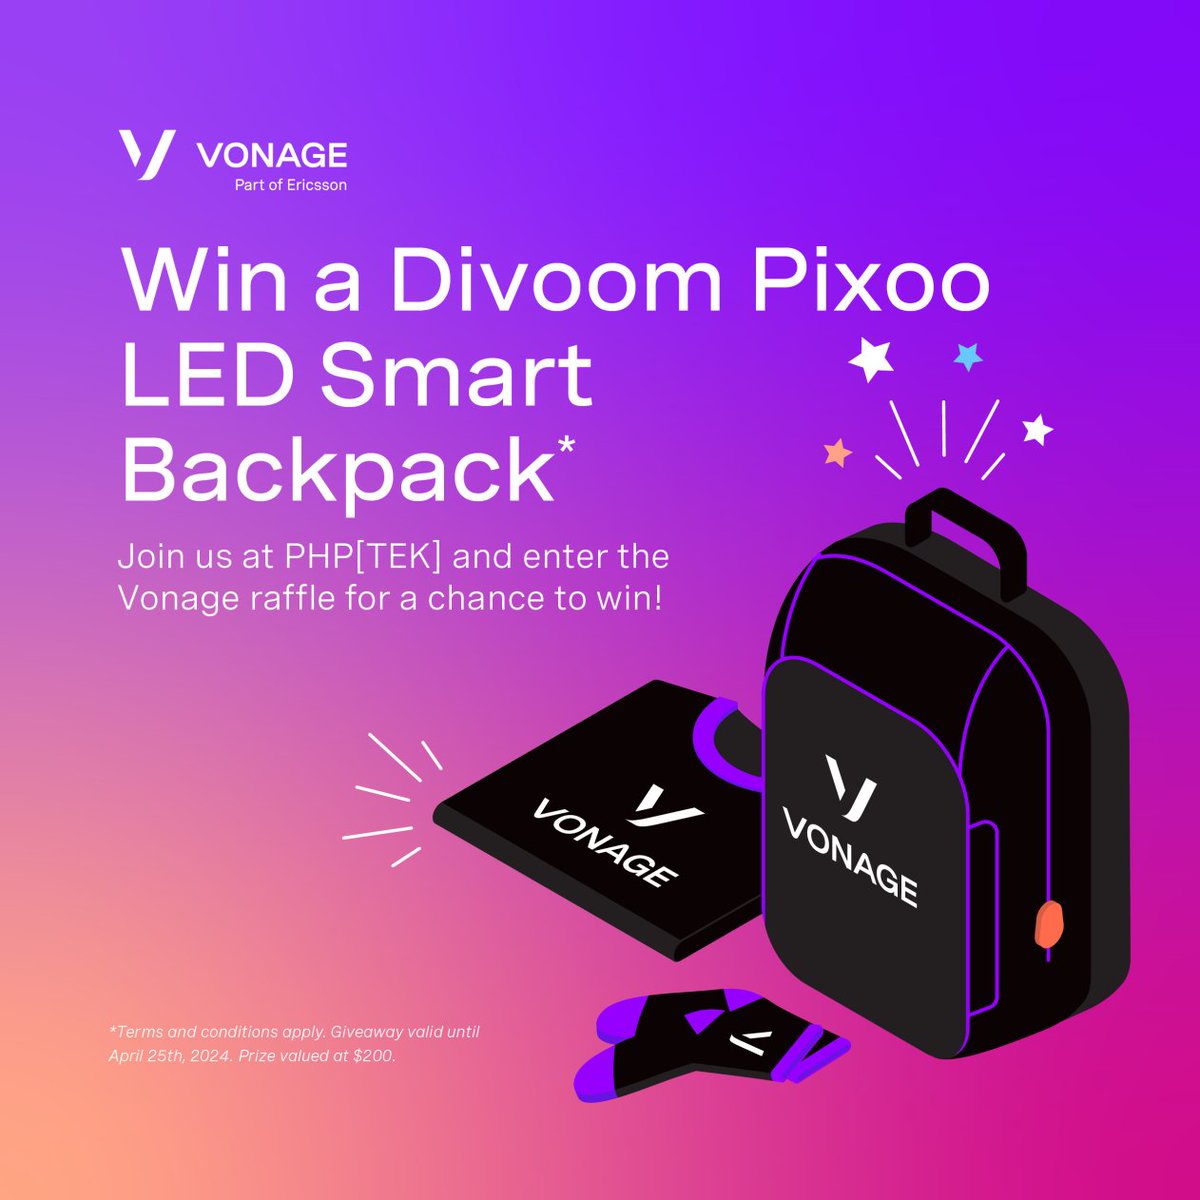 Come to the Vonage booth and talk to @Jim Seconde and @dragonmantank
They are both cool people with cool swag and surprises for you at PHP[TEK]. Try for a chance to win a Divoom Pixoo Smart LED Backpack too! T&Cs apply. #php #developers #phptek #swag